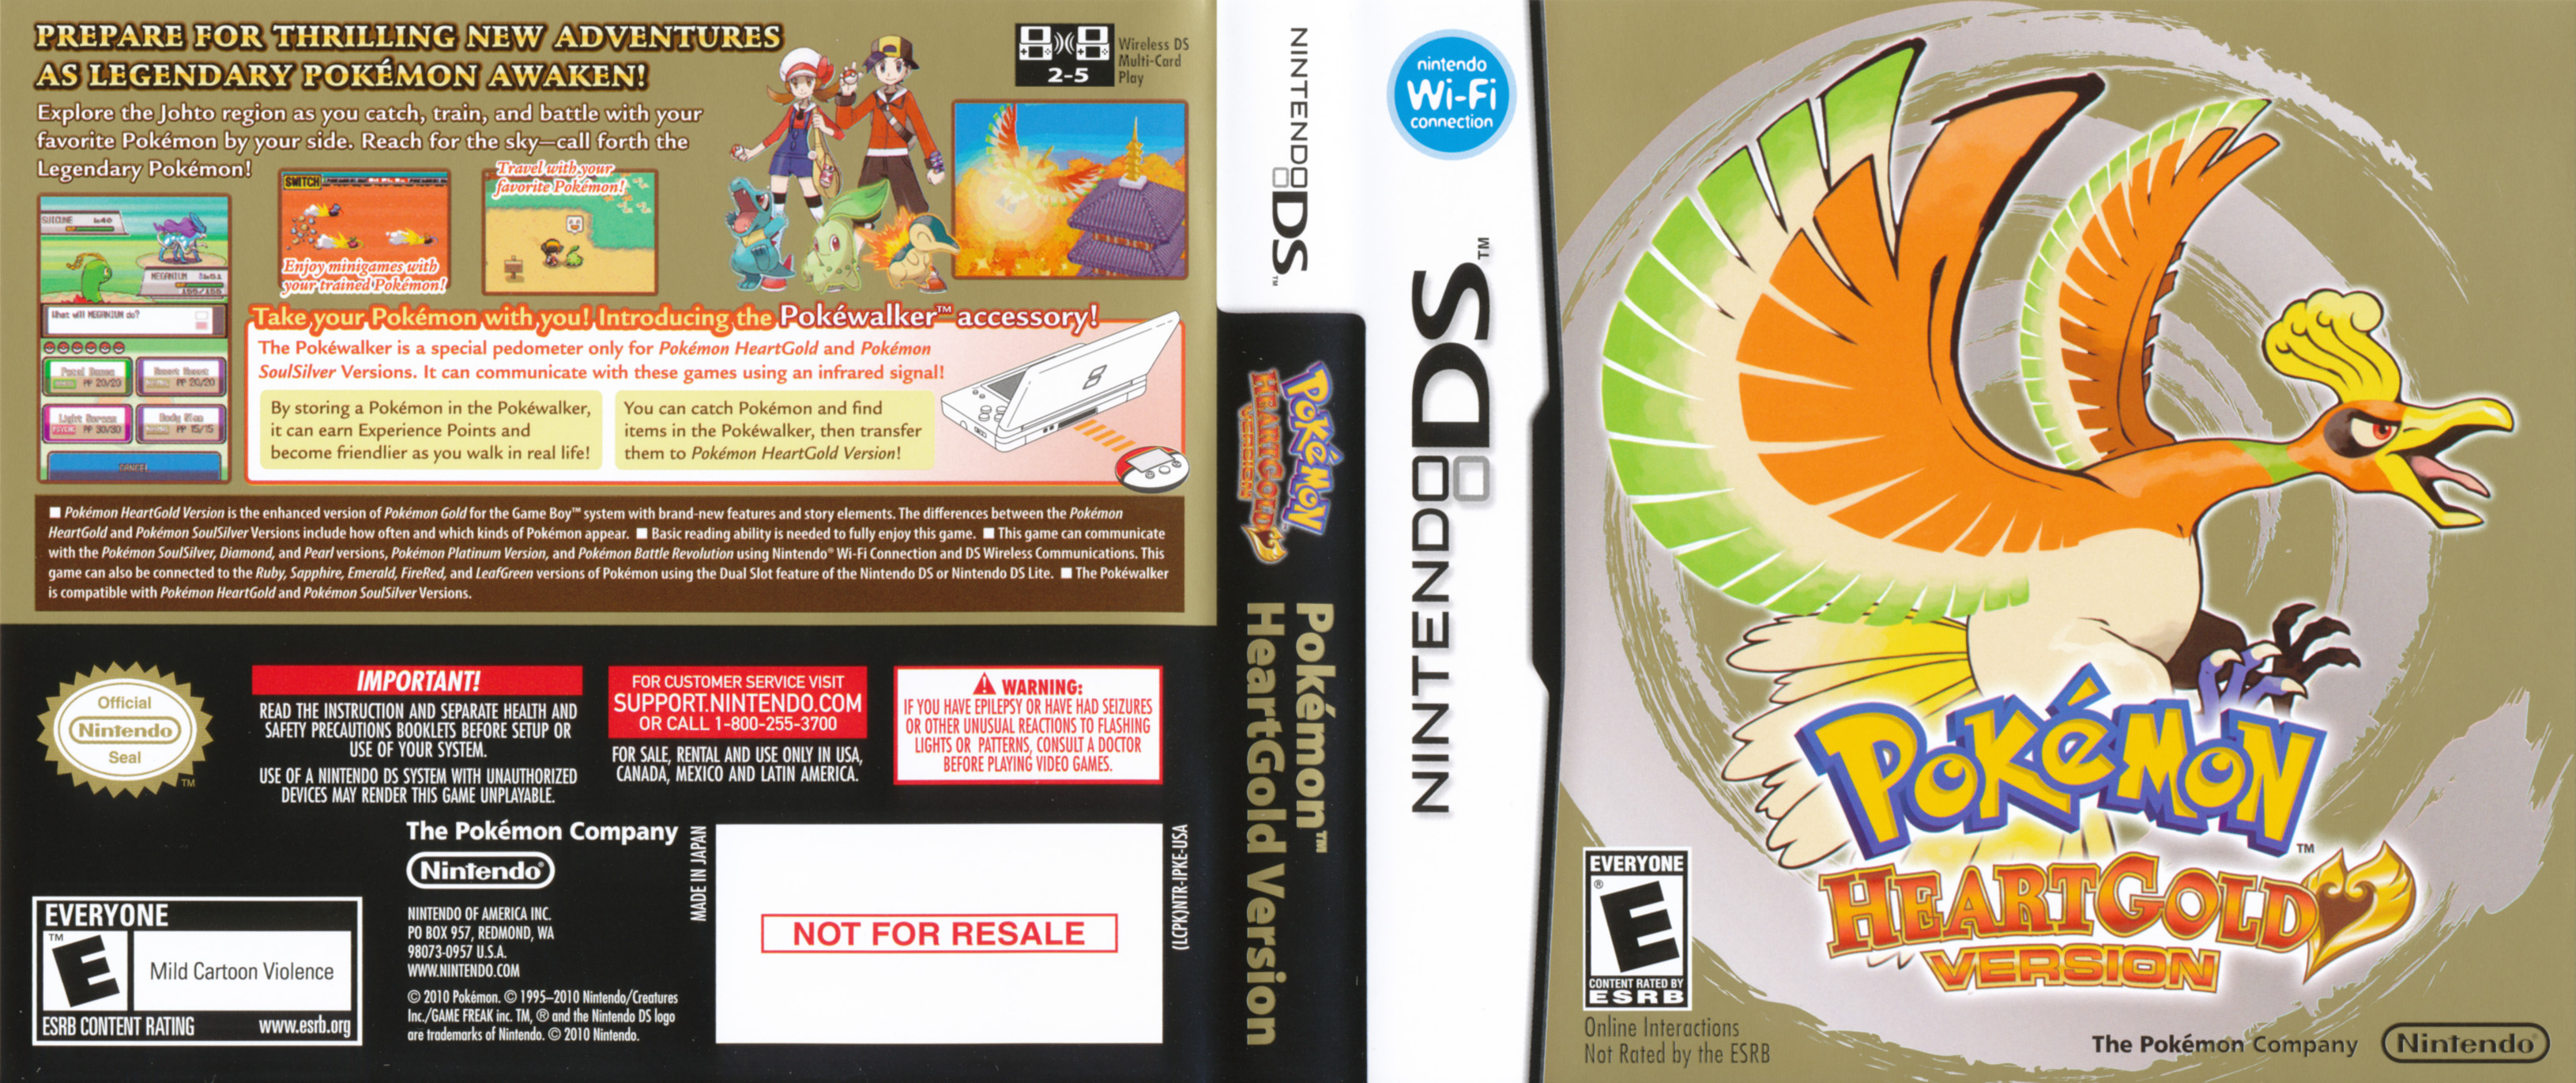 Pokemon Heartgold Version Nintendo Ds Covers Cover Century Over 500 000 Album Art Covers For Free